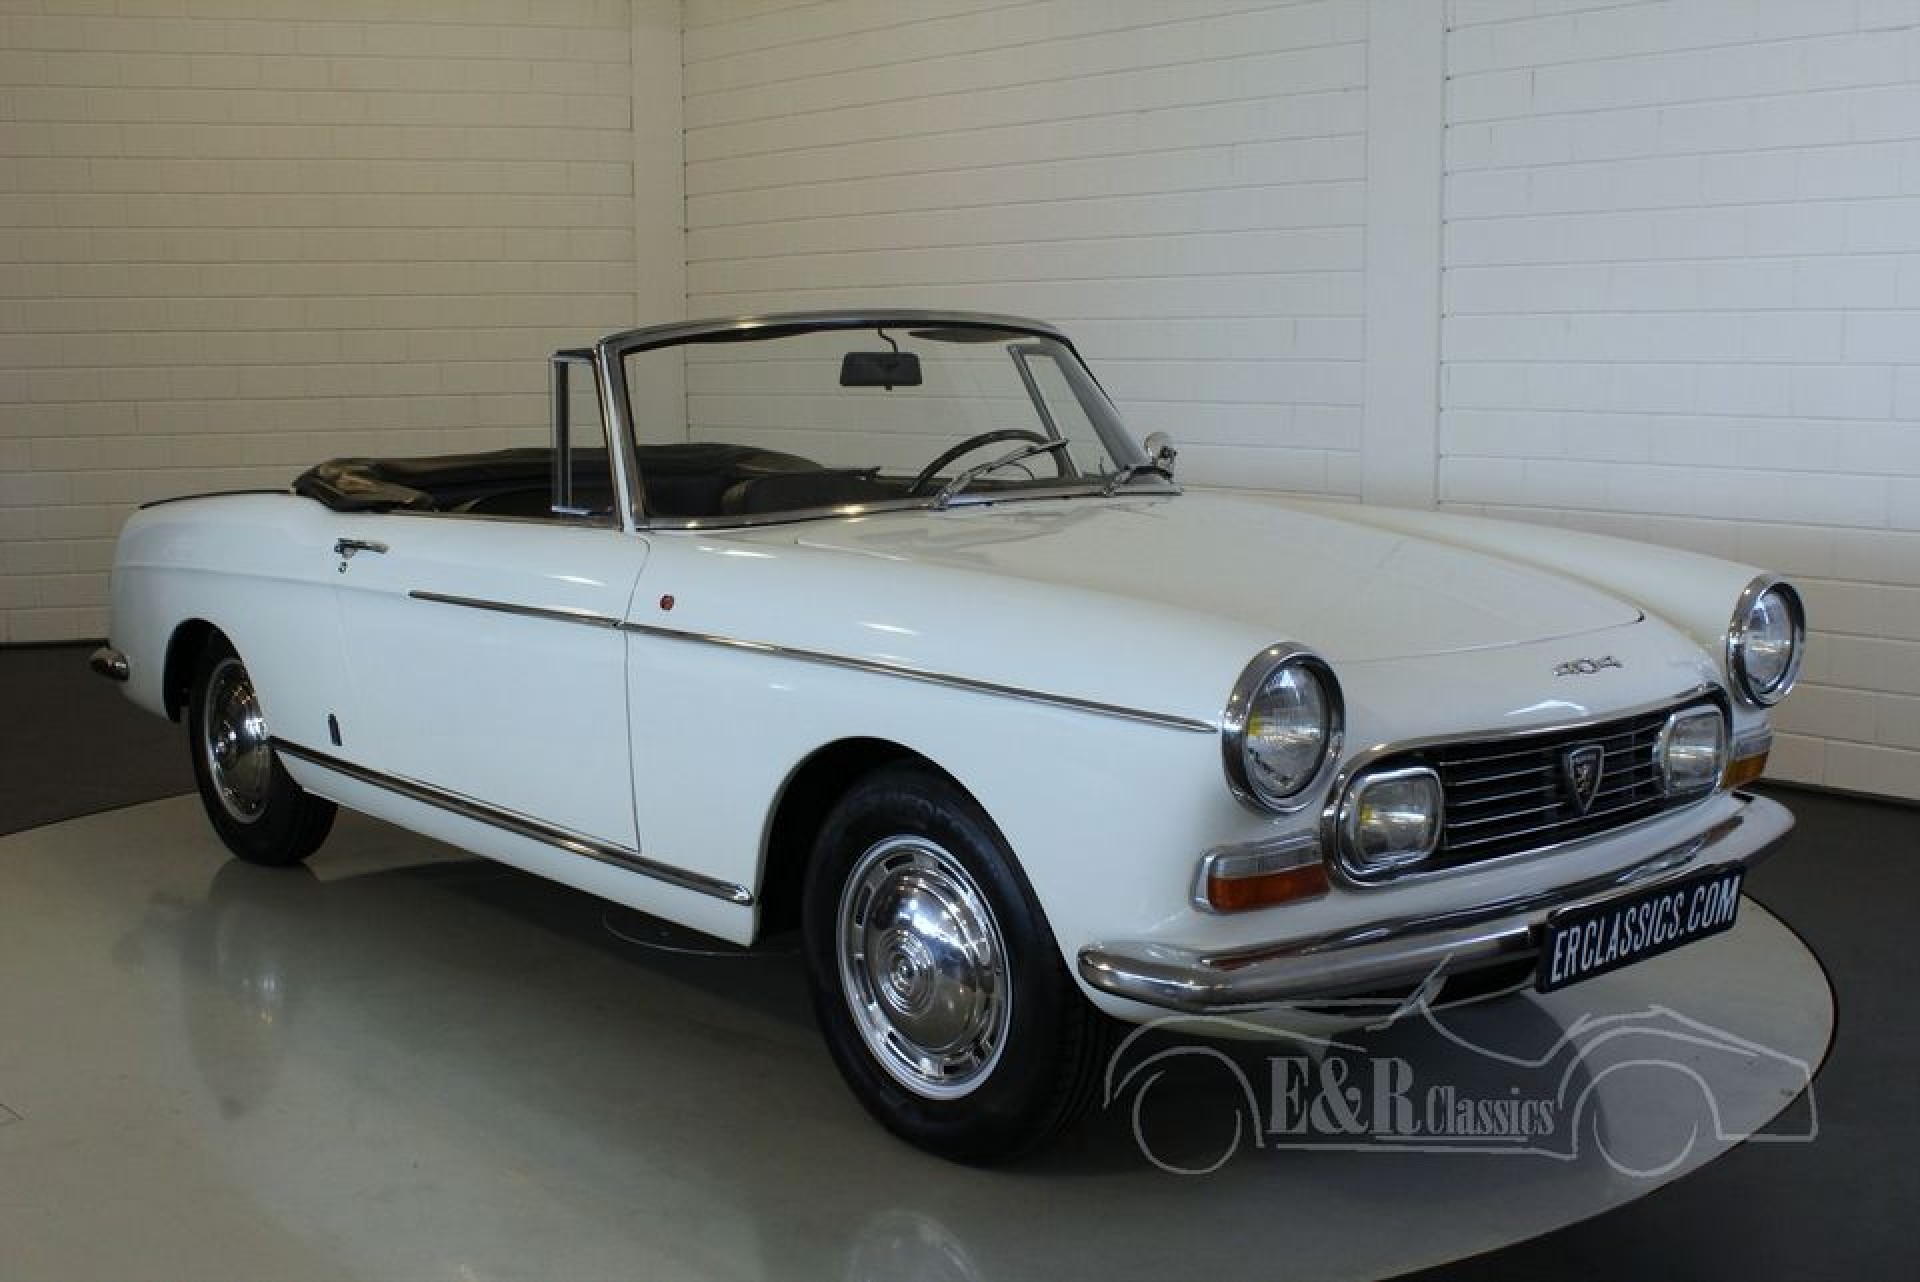 Peugeot 404 Cabriolet 1967 for sale at ERclassics